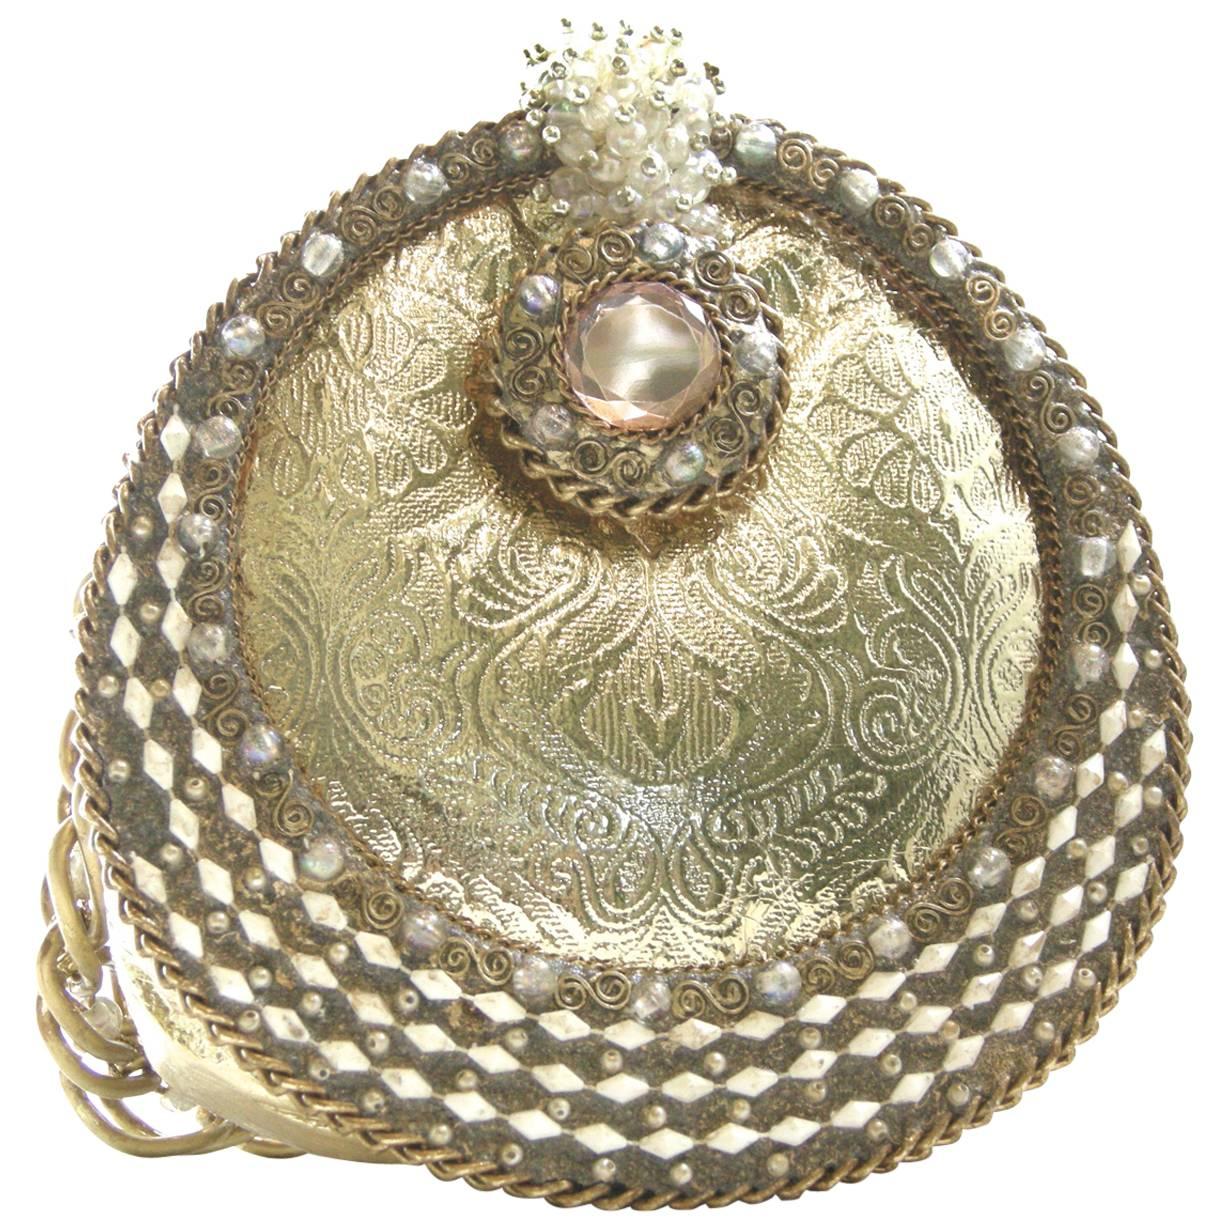 Mary Francis purses are very popular and collectible.   I consider this one of her special purses.   This exquisite gold leather and bead encrusted evening bag has a large faux pink topaz gemstone on the flap with white faux coral shells. The bag